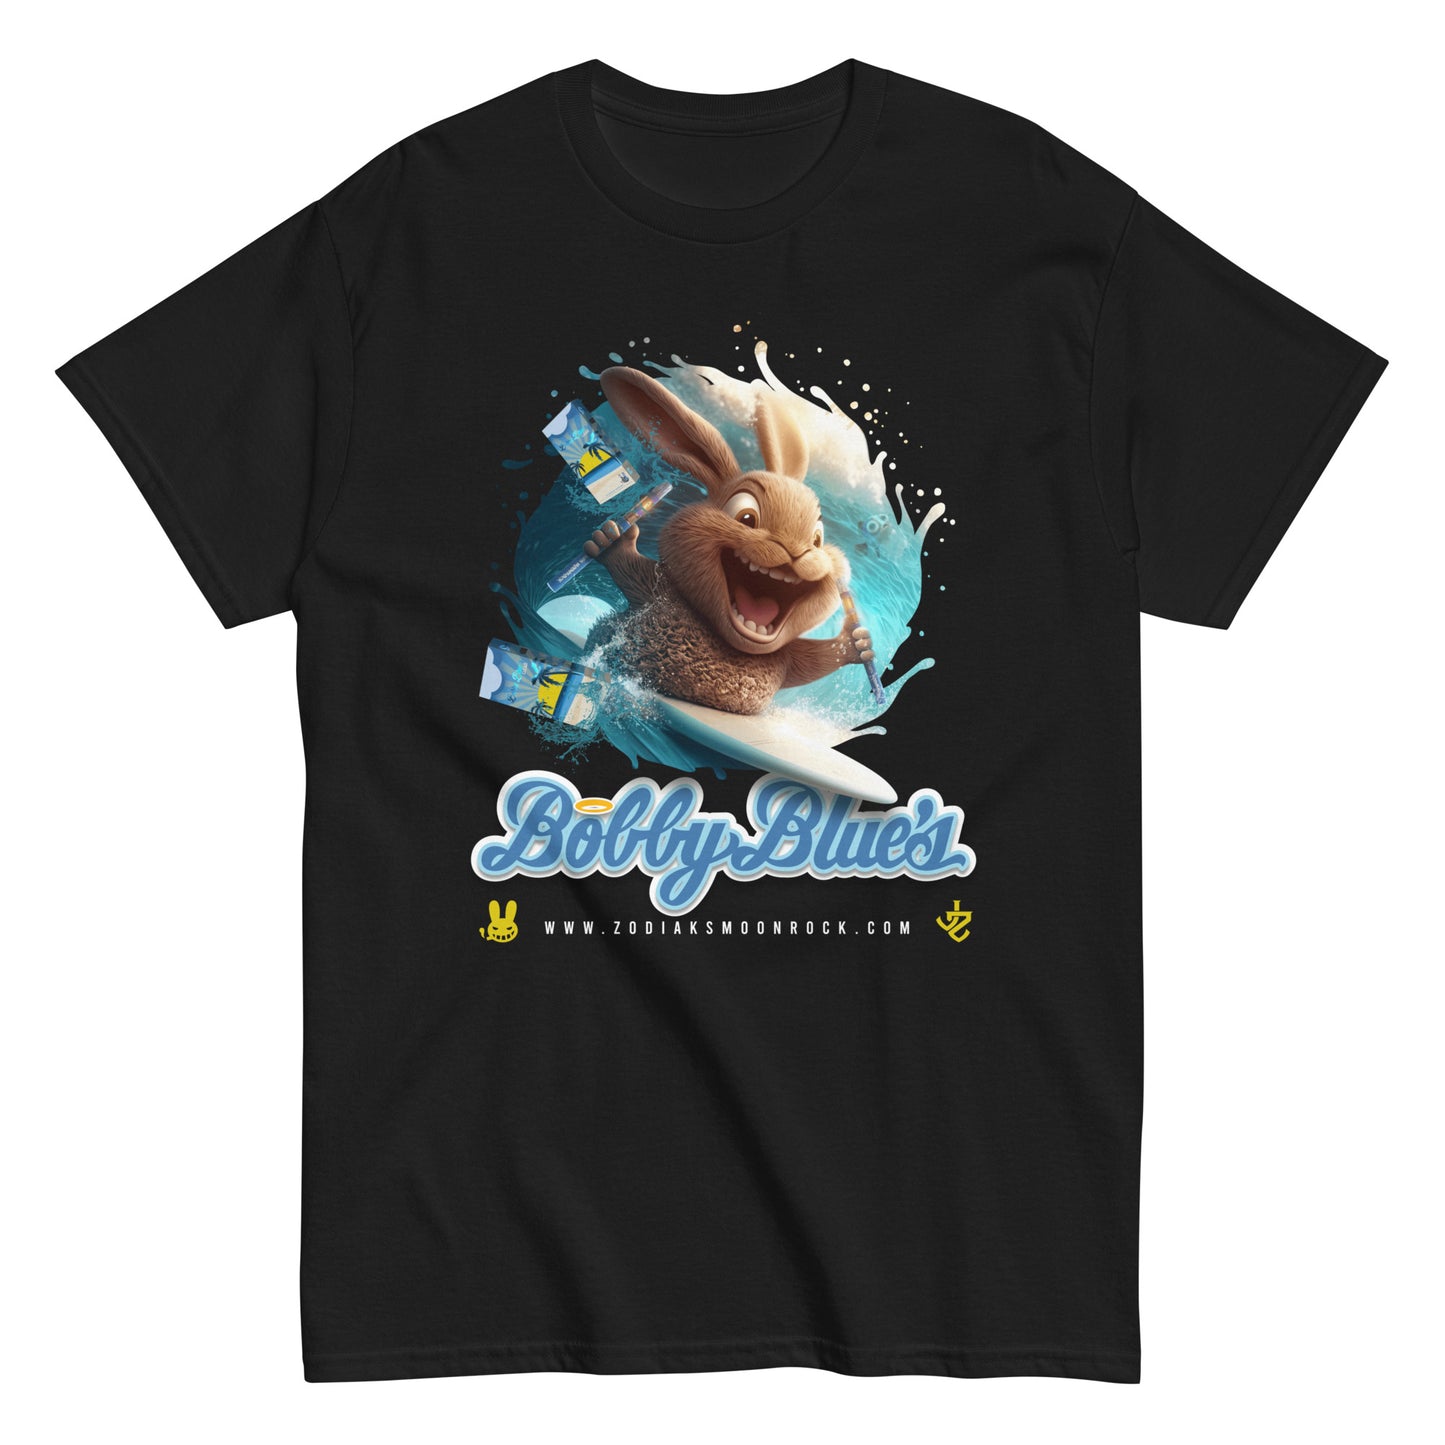 Bobby Blue's Surfing Bunny Tee by Dr. Zodiak's Moonrock